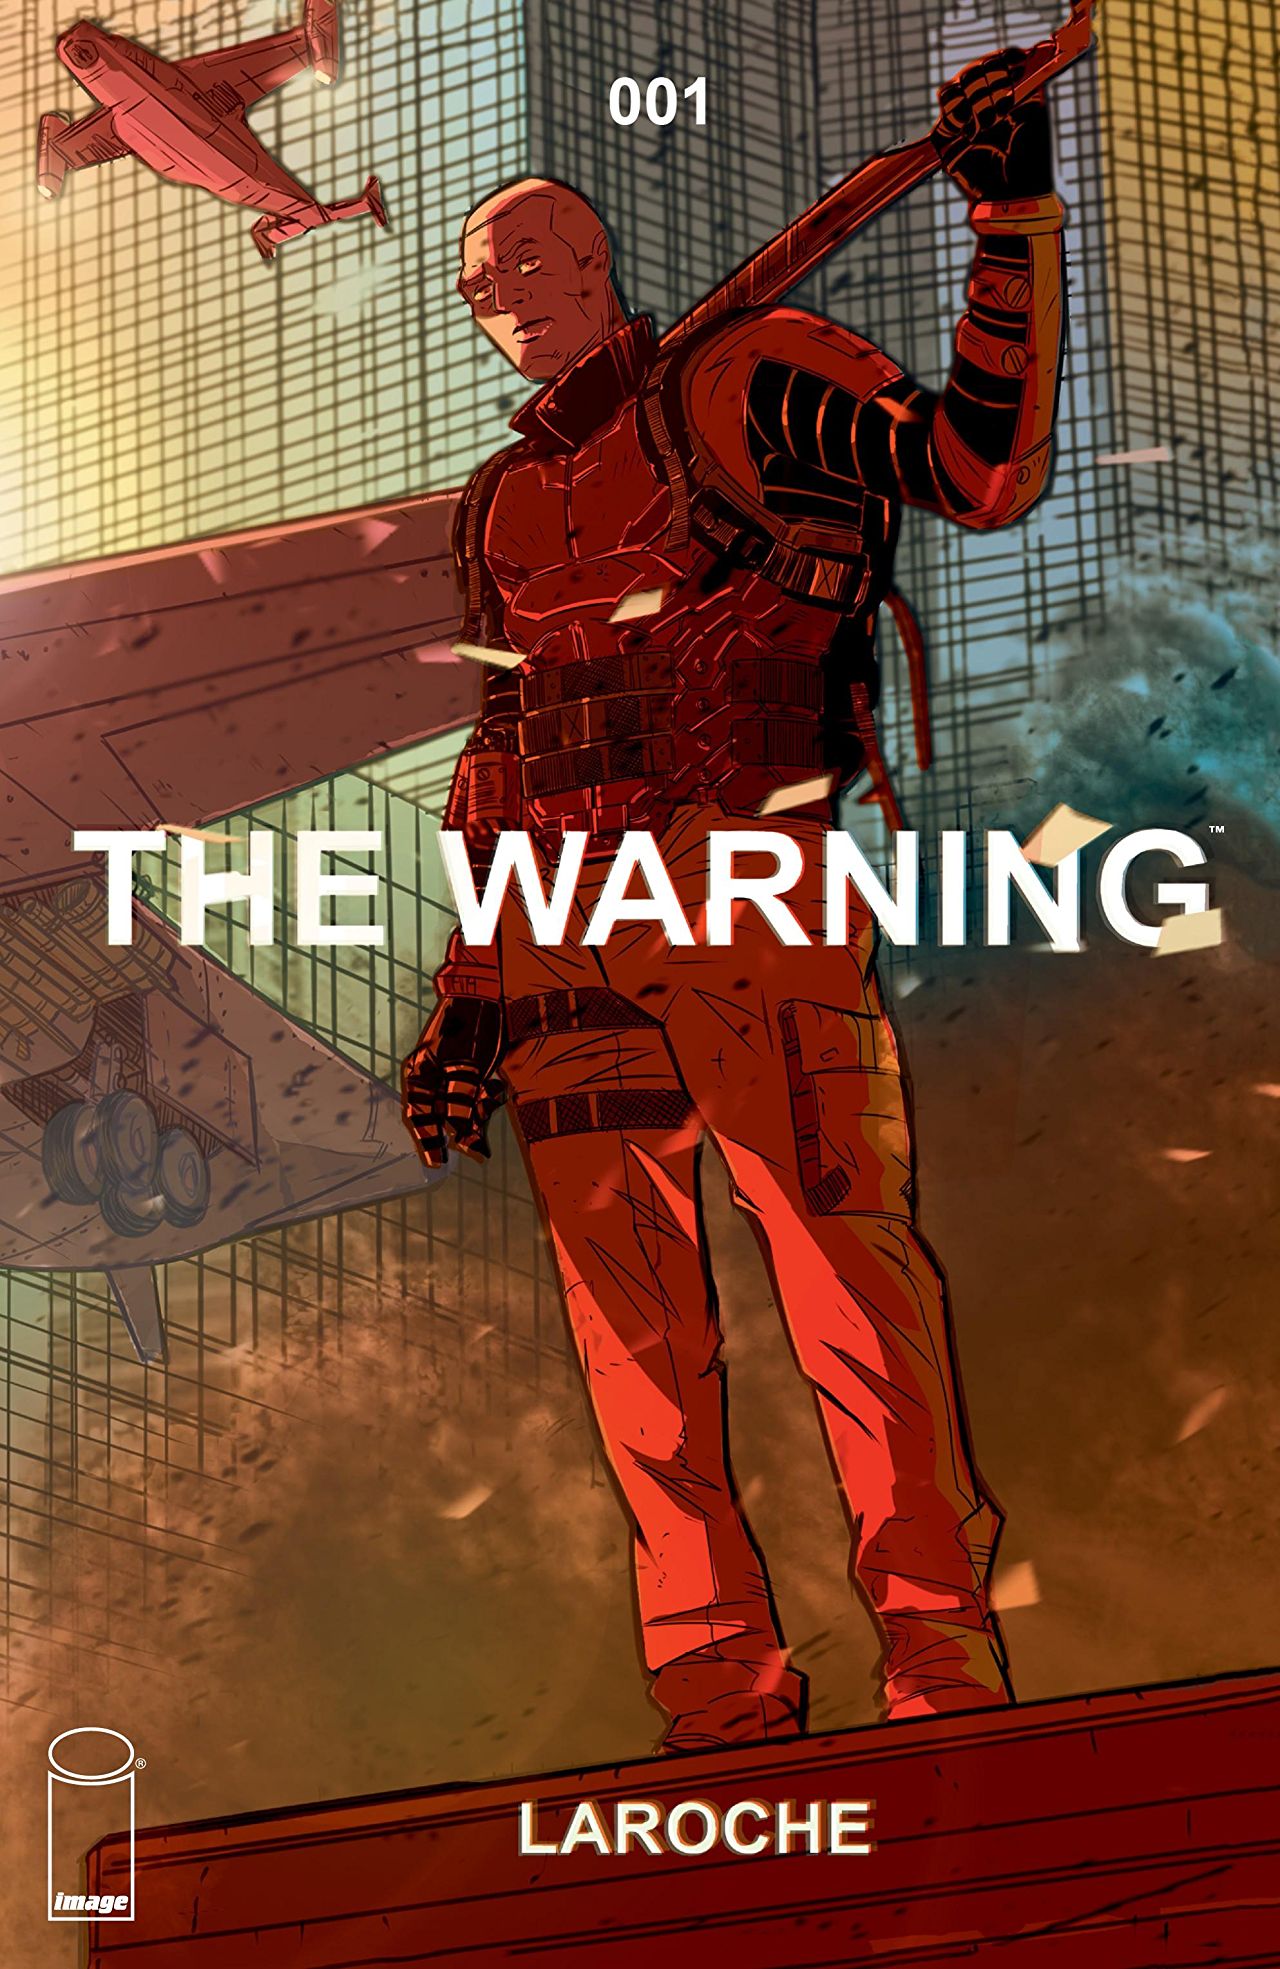 The Warning #1 review: Nothing more than the sum of its parts